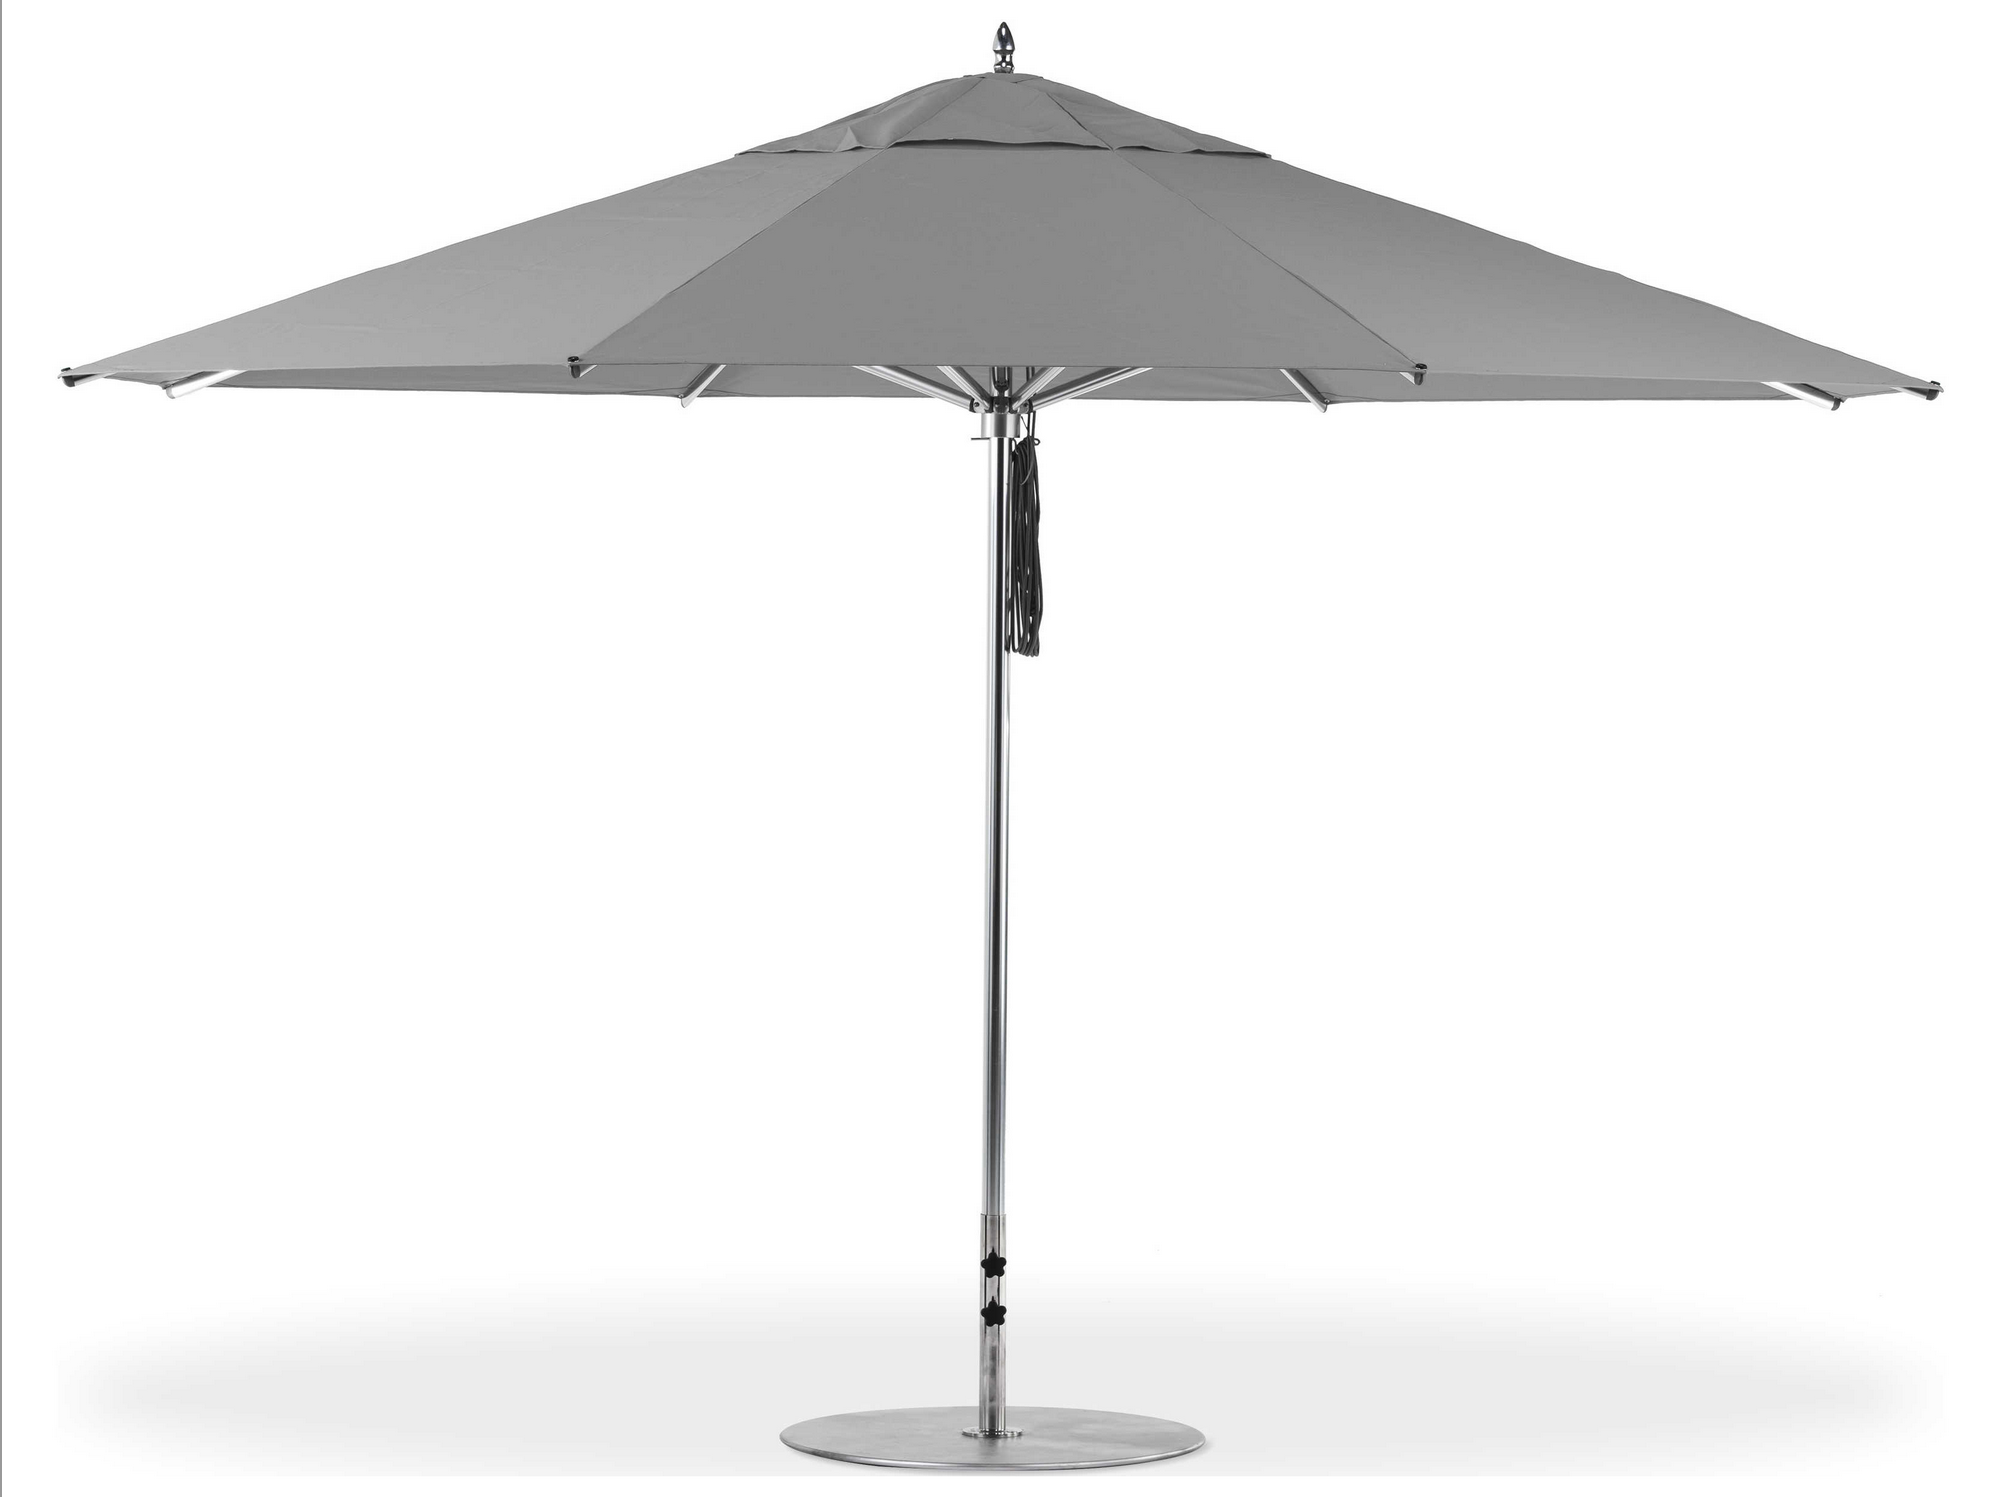 Screenshot 2023-09-04 at 16-50-57 Frankford G-Series Greenwich Market Aluminum Silver Anodized 13 Foot Octagon Double Pulley Lift Umbrella.png